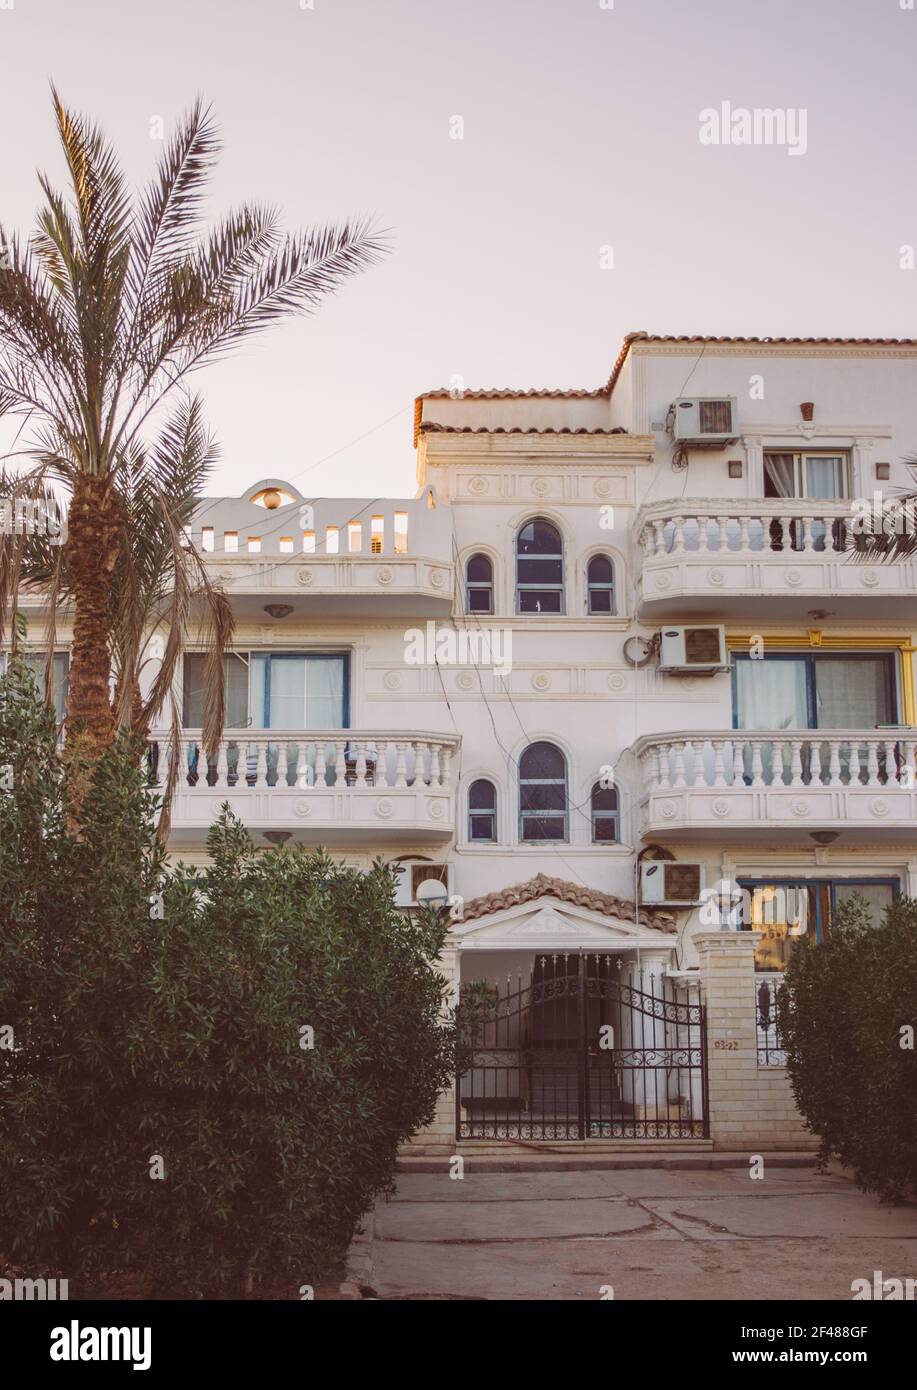 White house in Egypt with beautiful arched balconies and air conditioners. A palm tree and beautiful green bushes grow near the house. Paved backyard Stock Photo